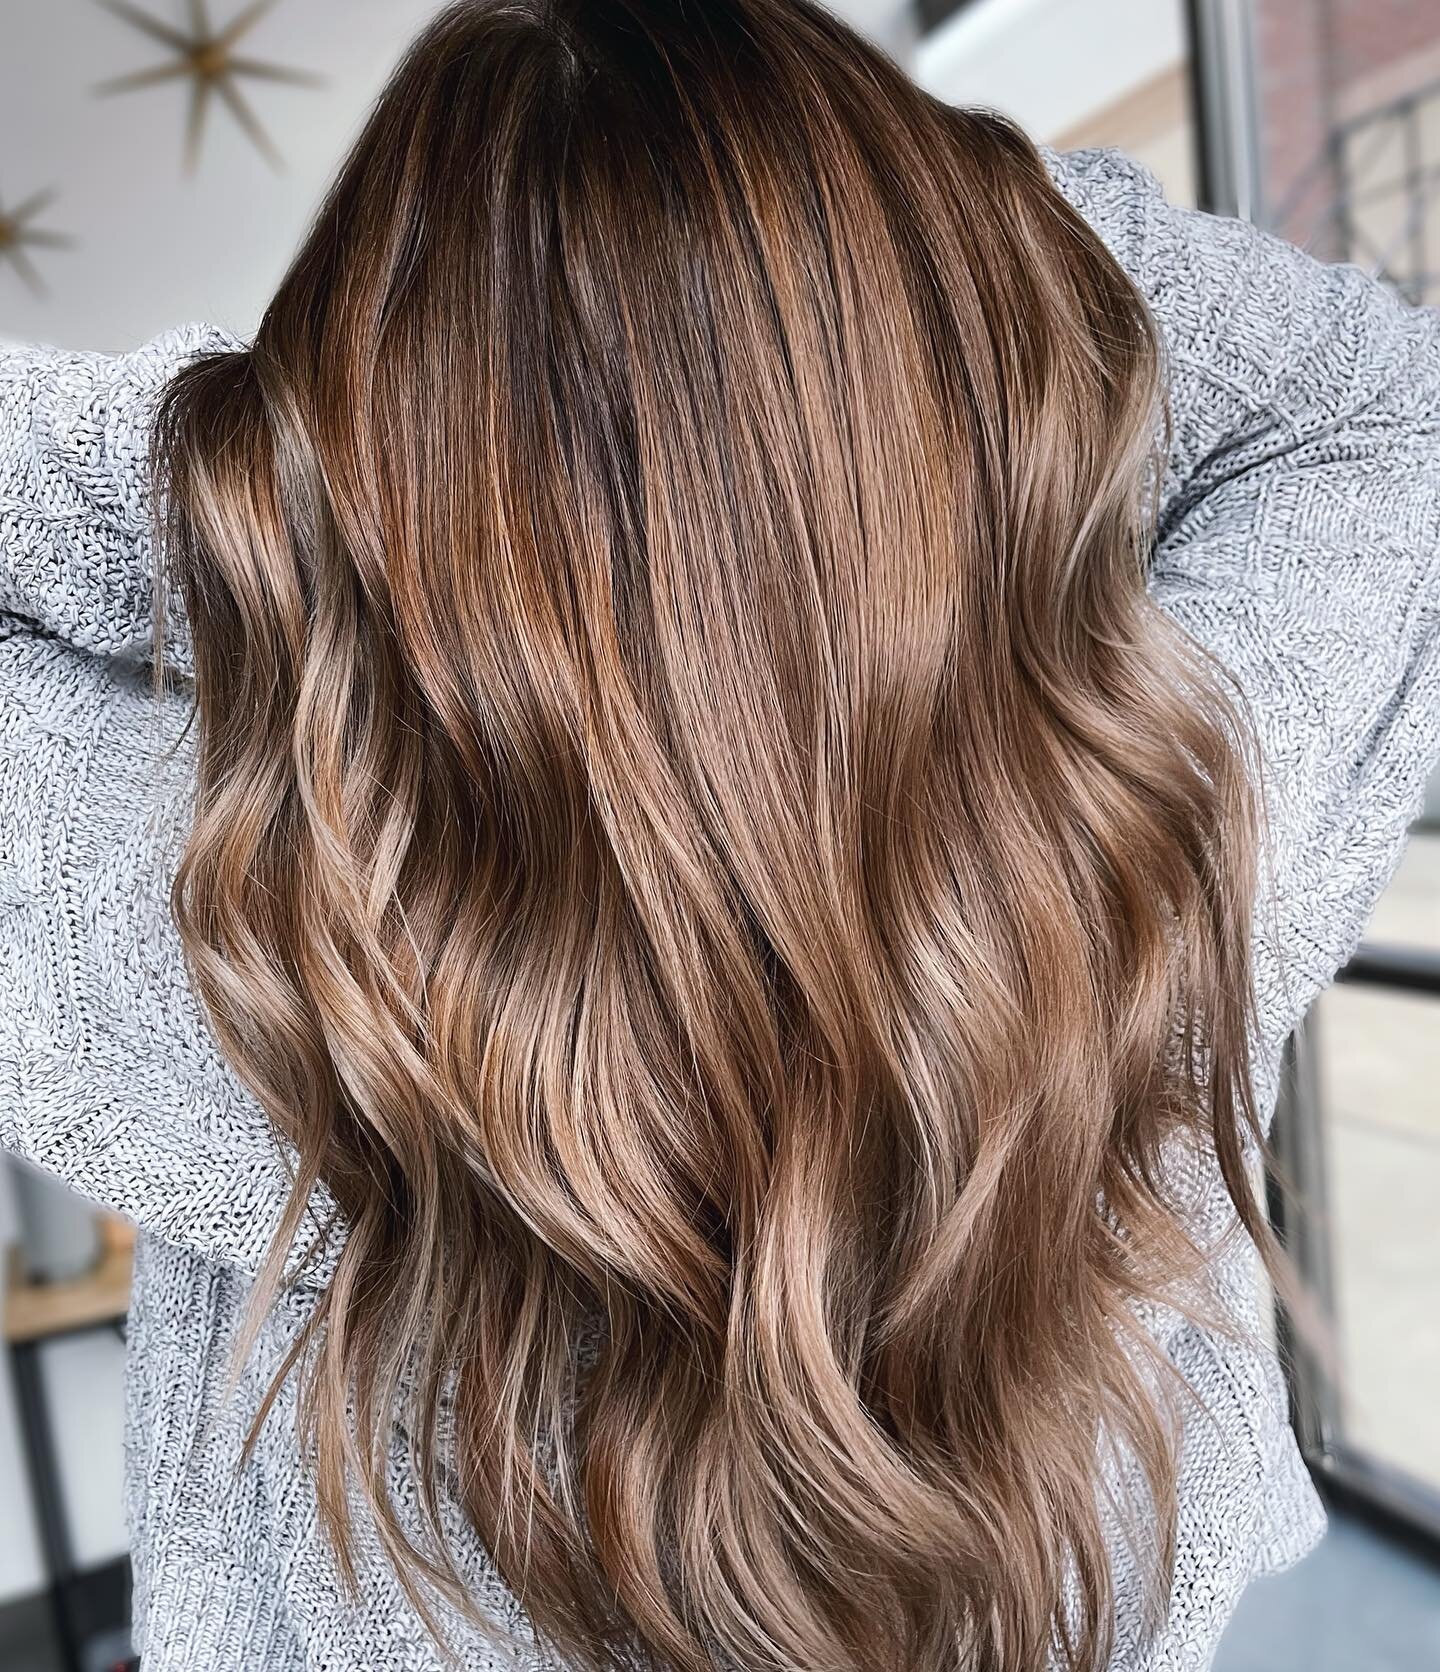 Call it mushroom color or whatever you&rsquo;d like, it&rsquo;s just gorgeous 🤩
.
.
#balayage #highlights #bestofbalayage #balayageinspo #balayageartists #ittakesapro #beautytrends#hairinspo
#clevelandbalayage #balayage #clestylist #clevelandorganic